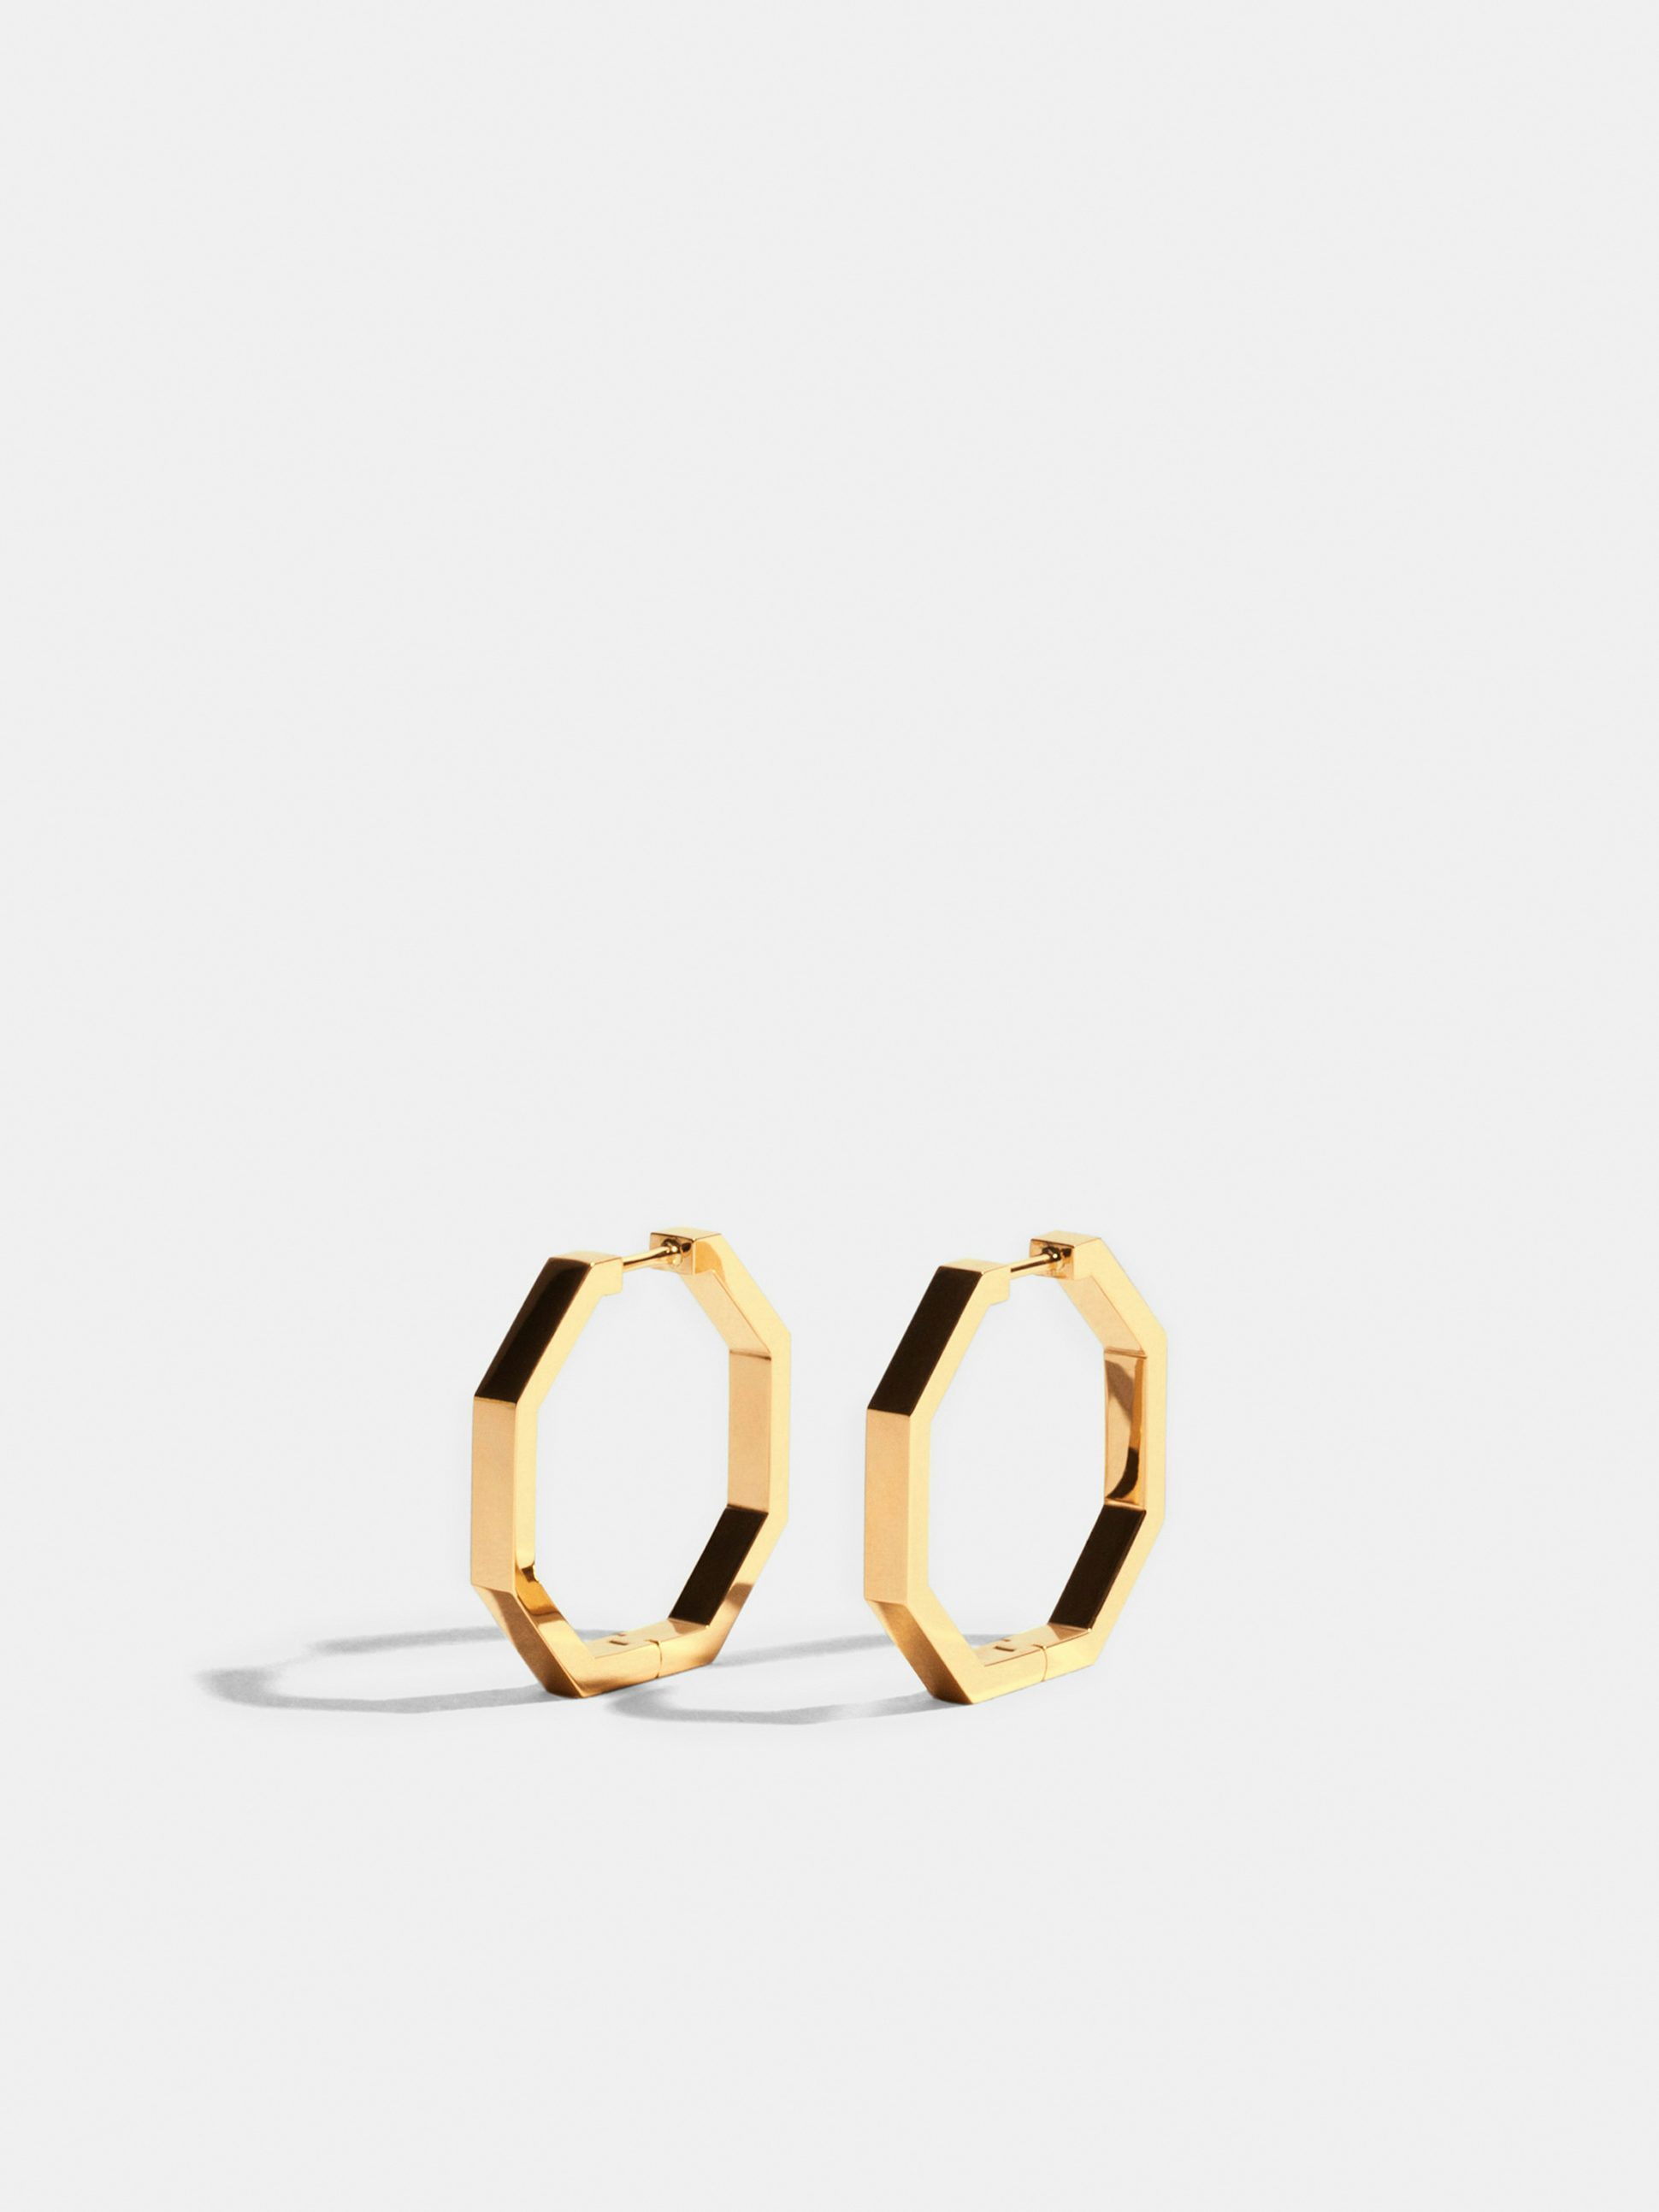 Octogone 18mm earrings in 18k Fairmined ethical yellow gold, the pair.